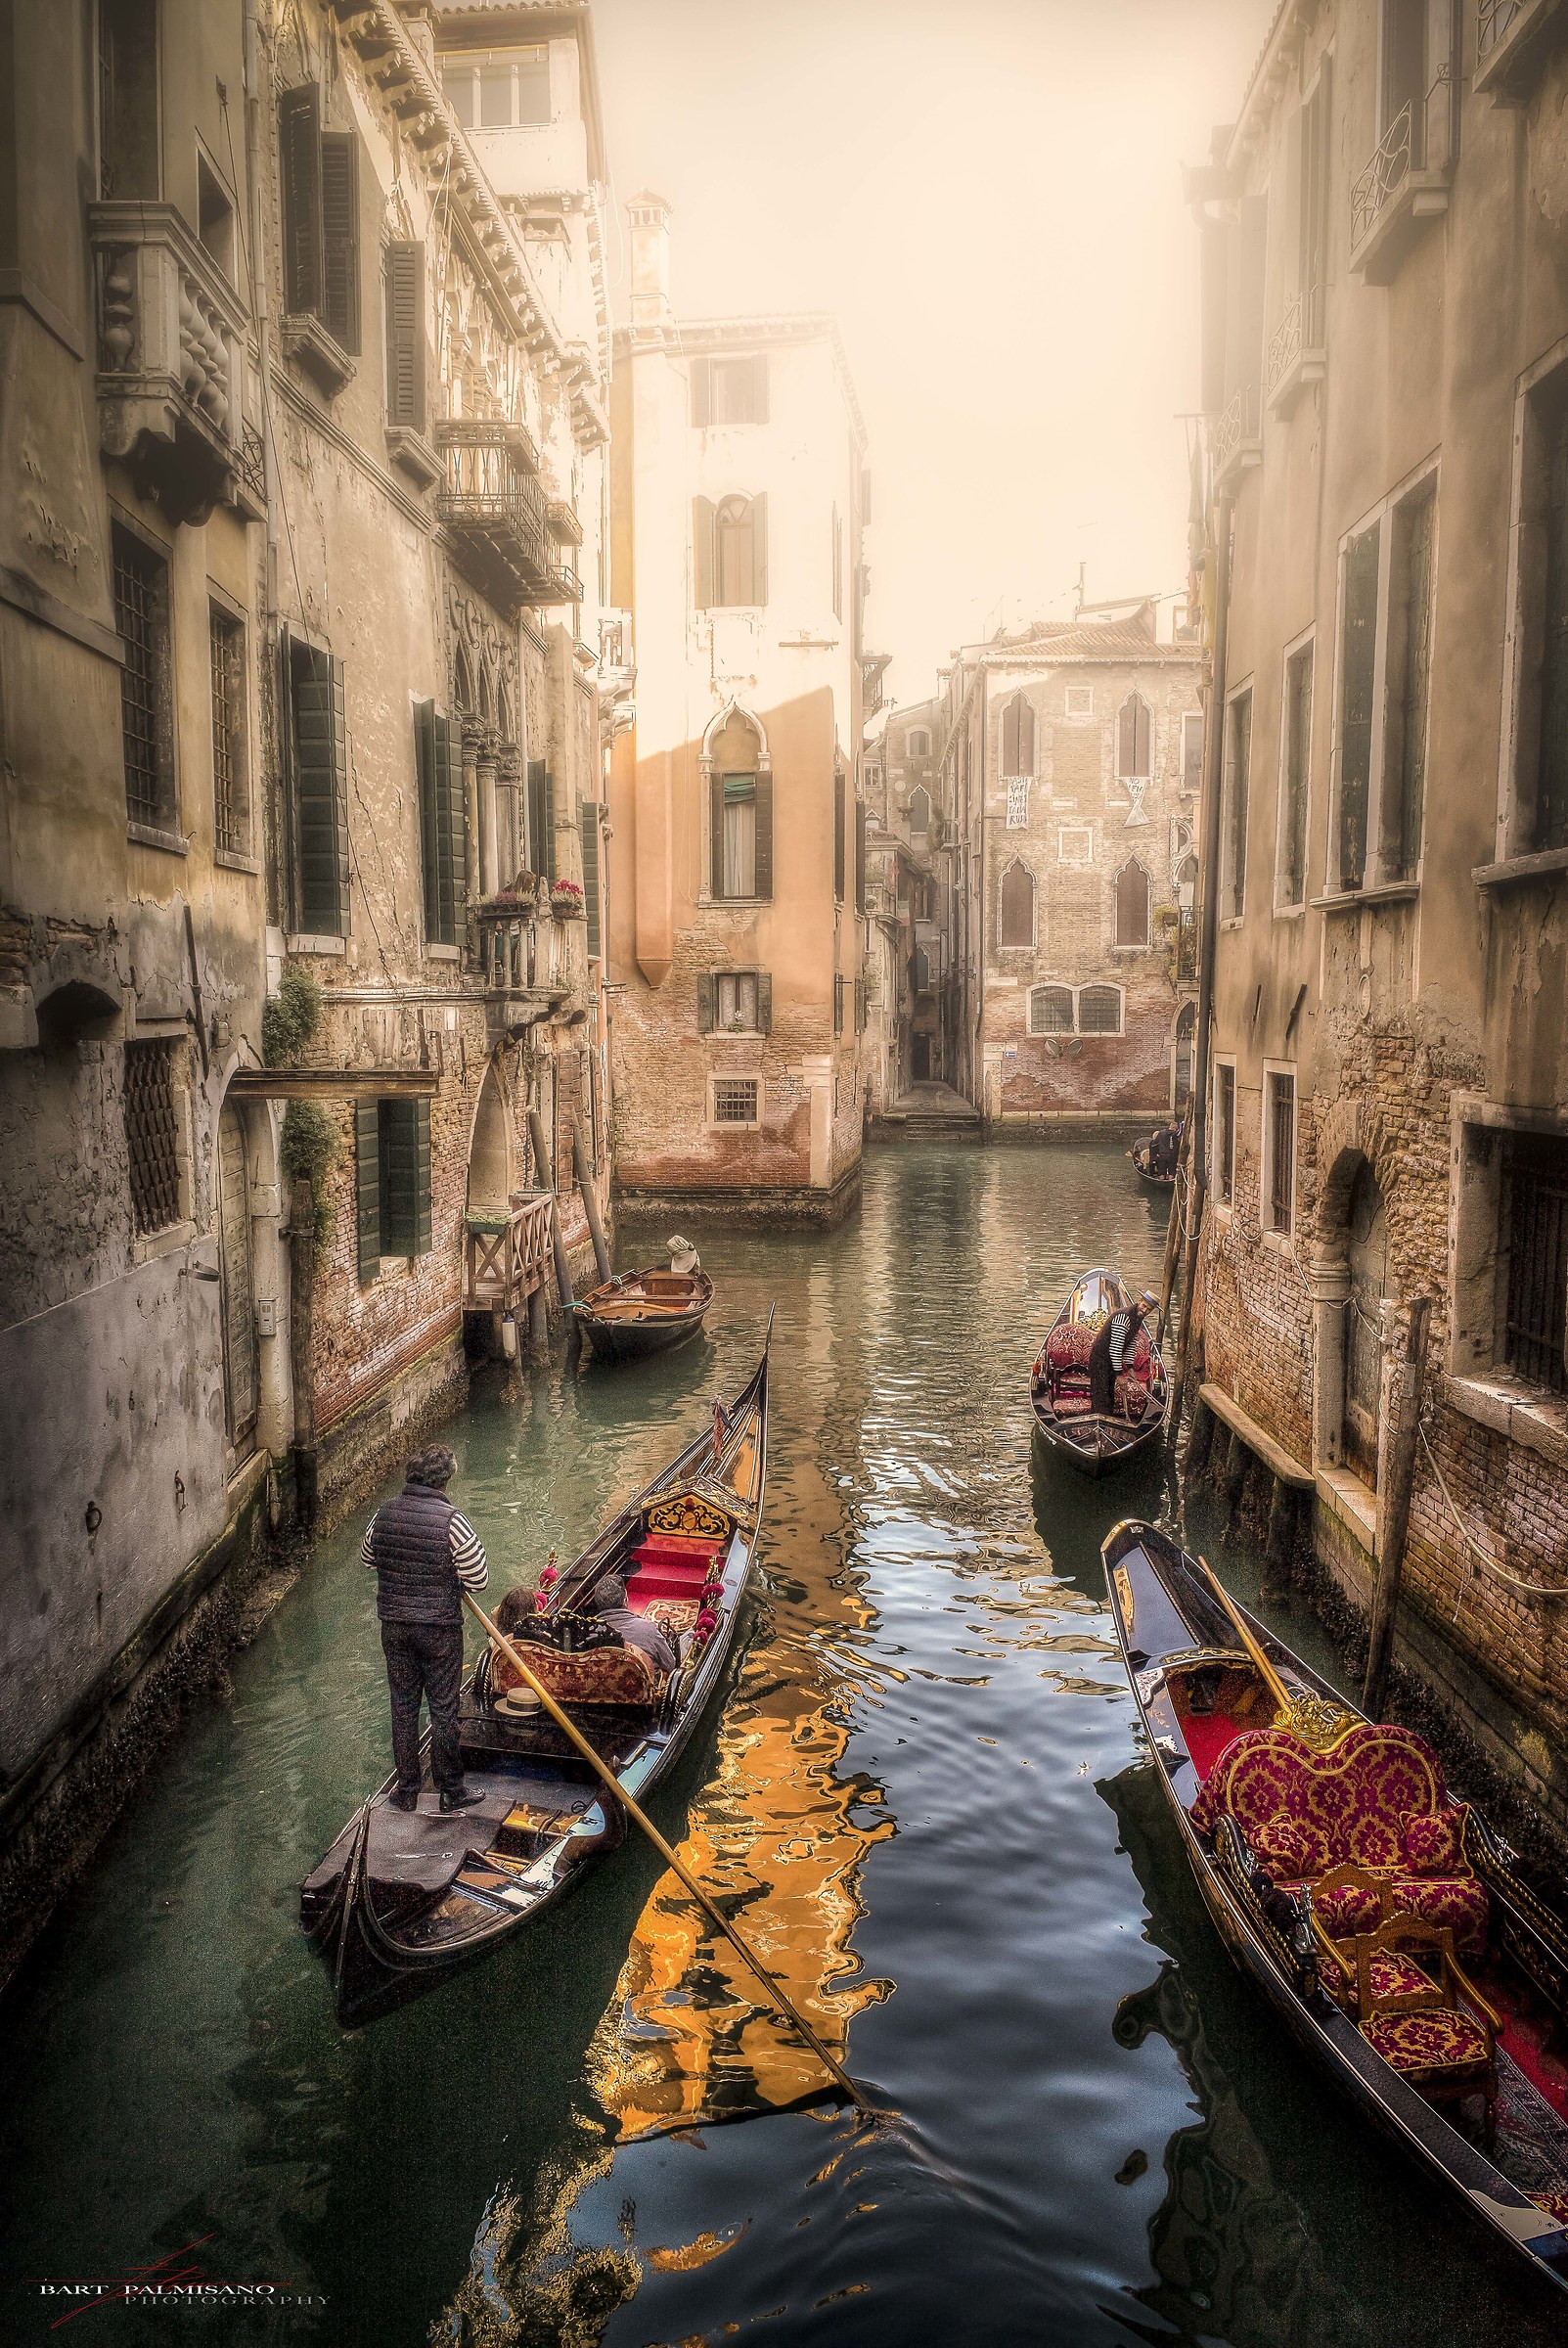 The Gondolier...